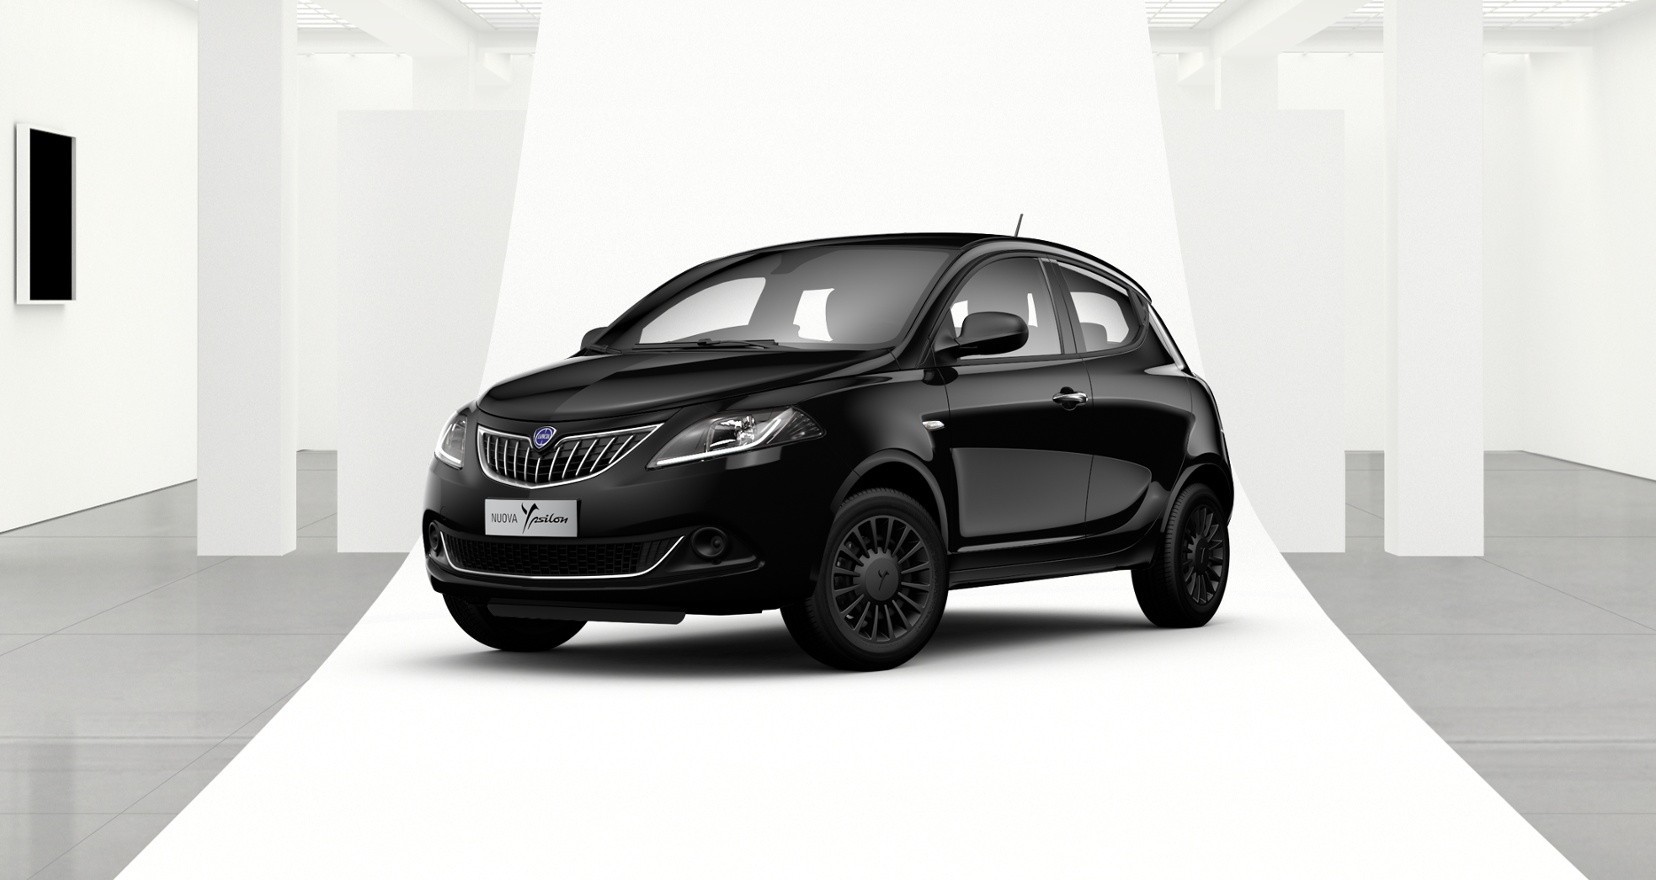 This Is the New Lancia Ypsilon Special Edition Model That Nobody